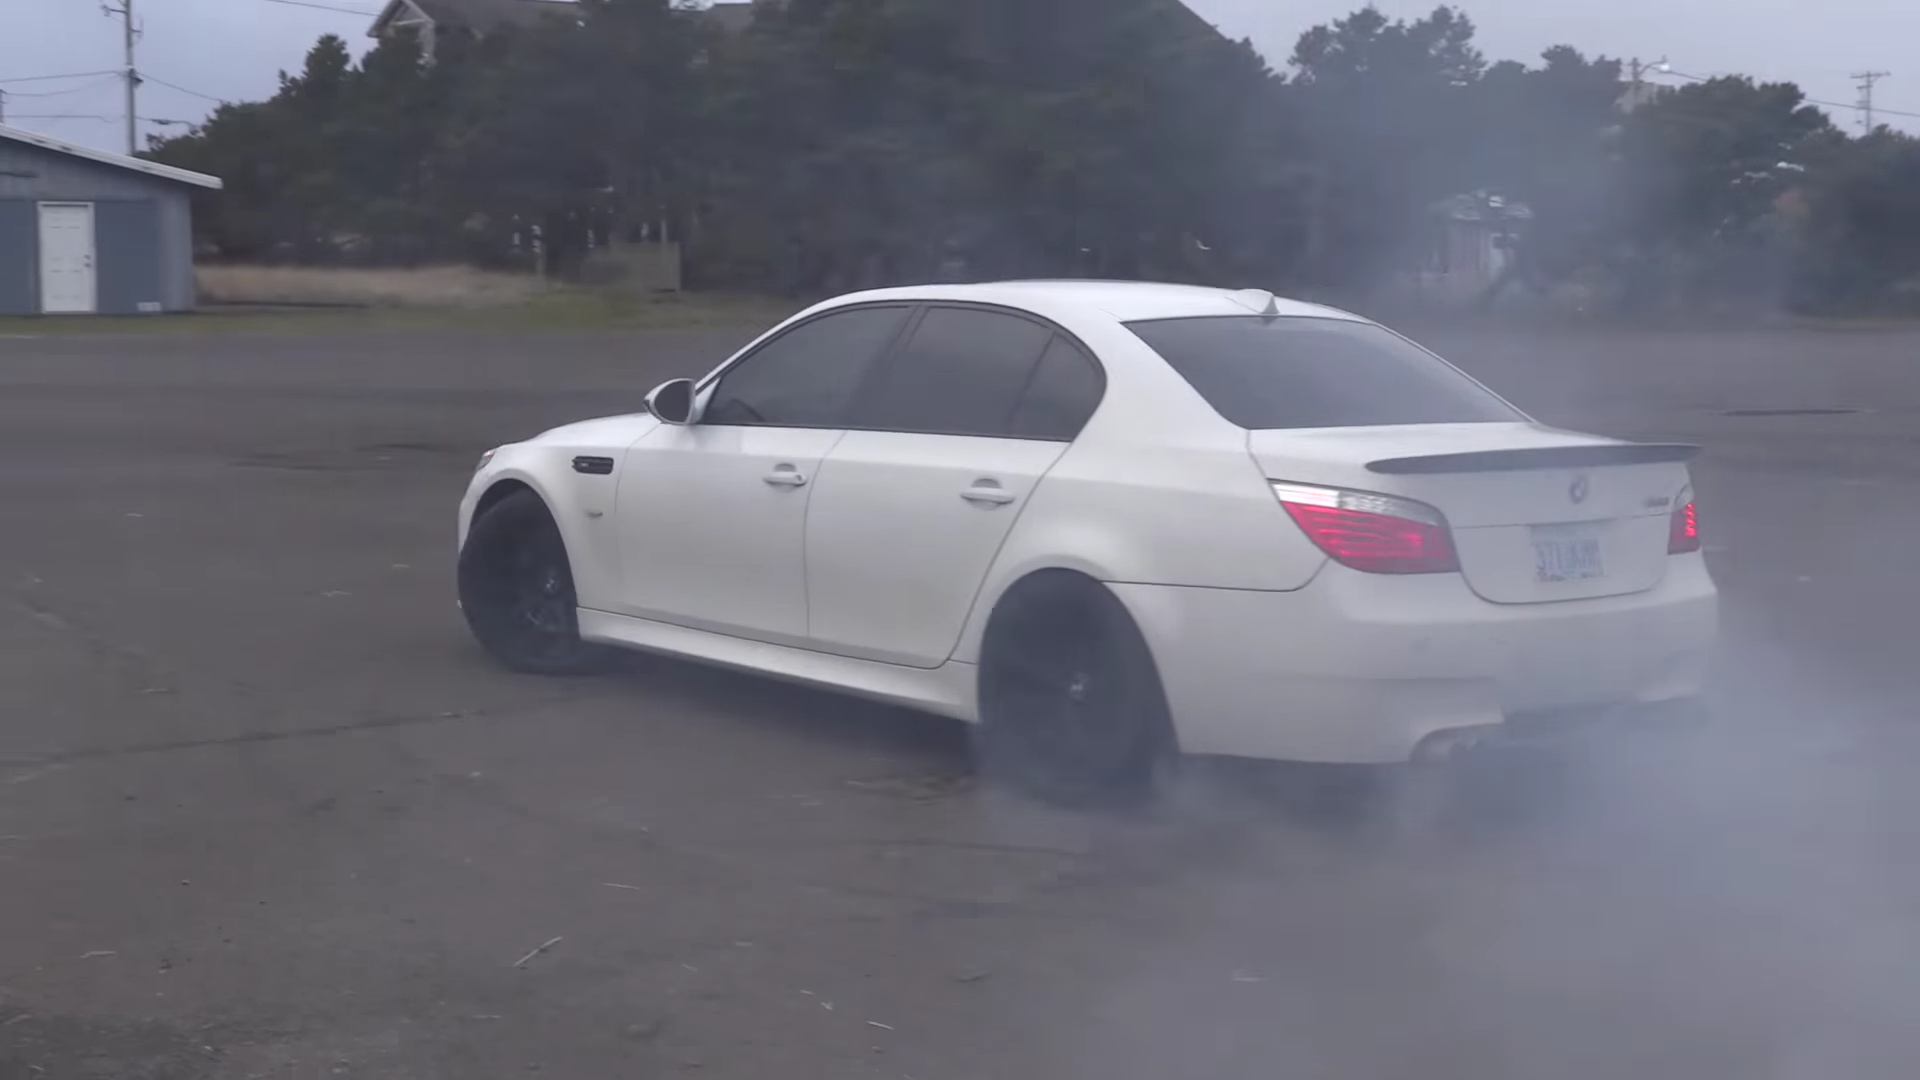 BMW M5 doing some donuts and burning some rubber in a parking lot.